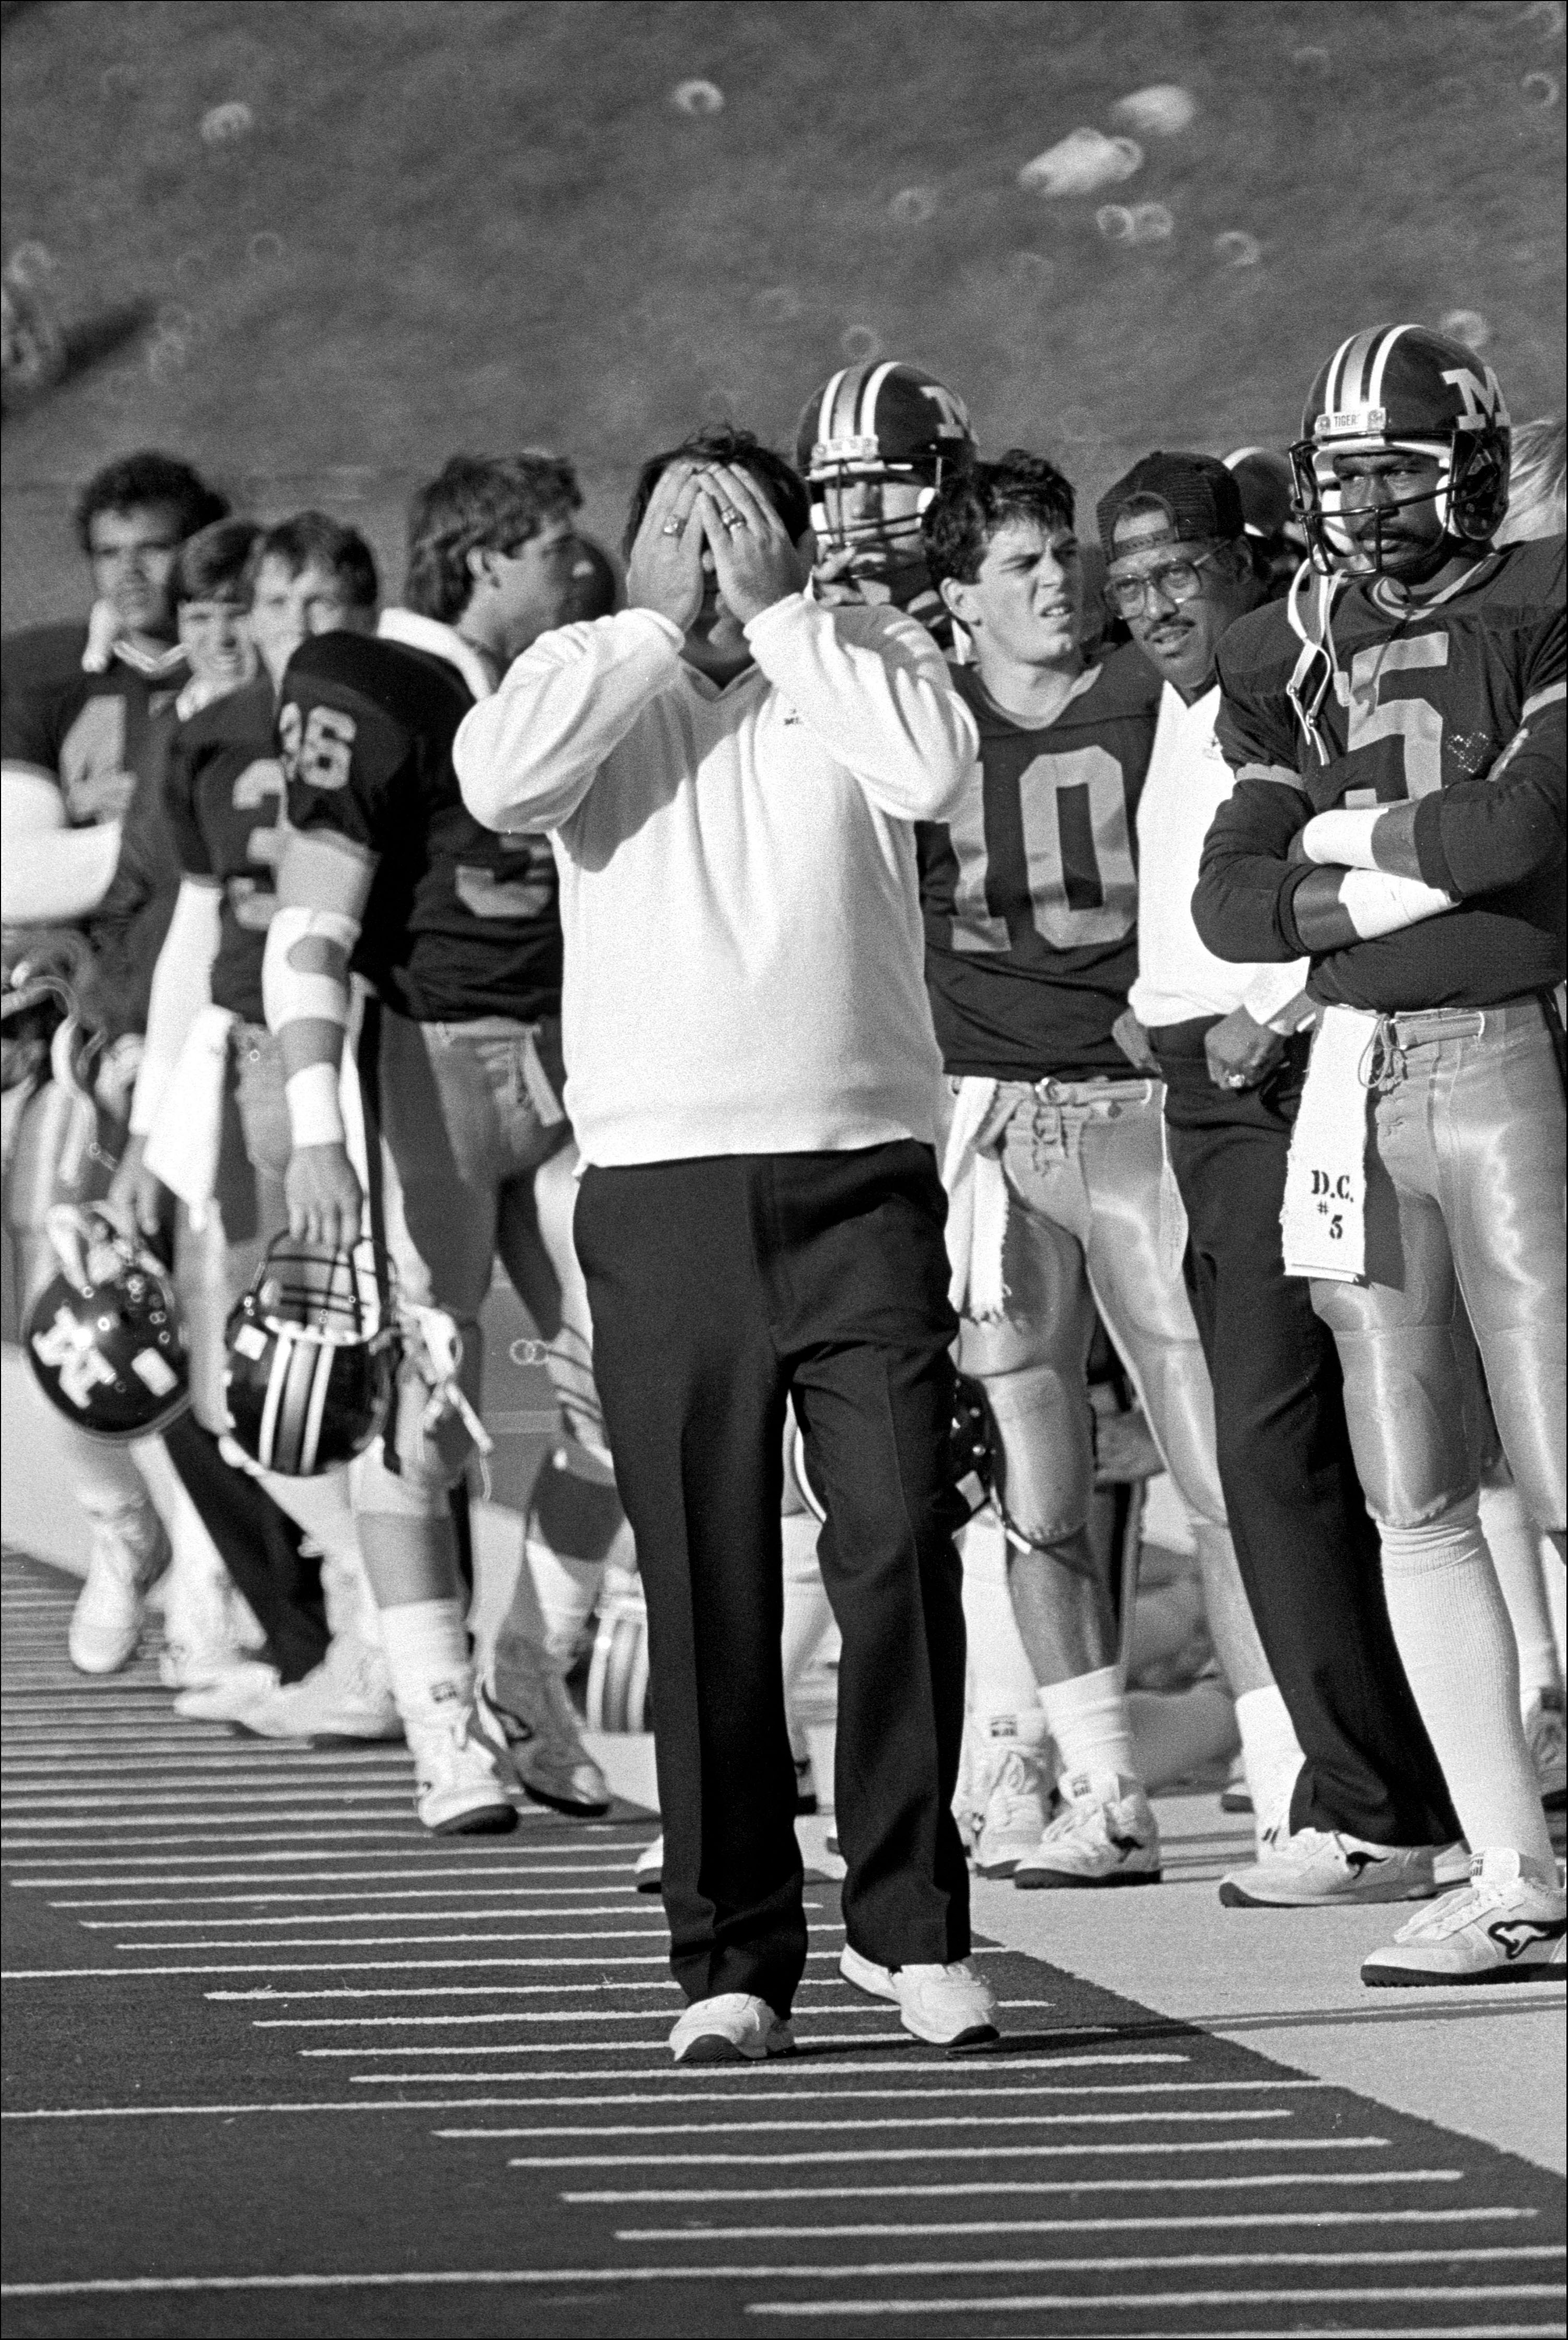 A football coach stands with his face in his hands along the sidelines during a game.